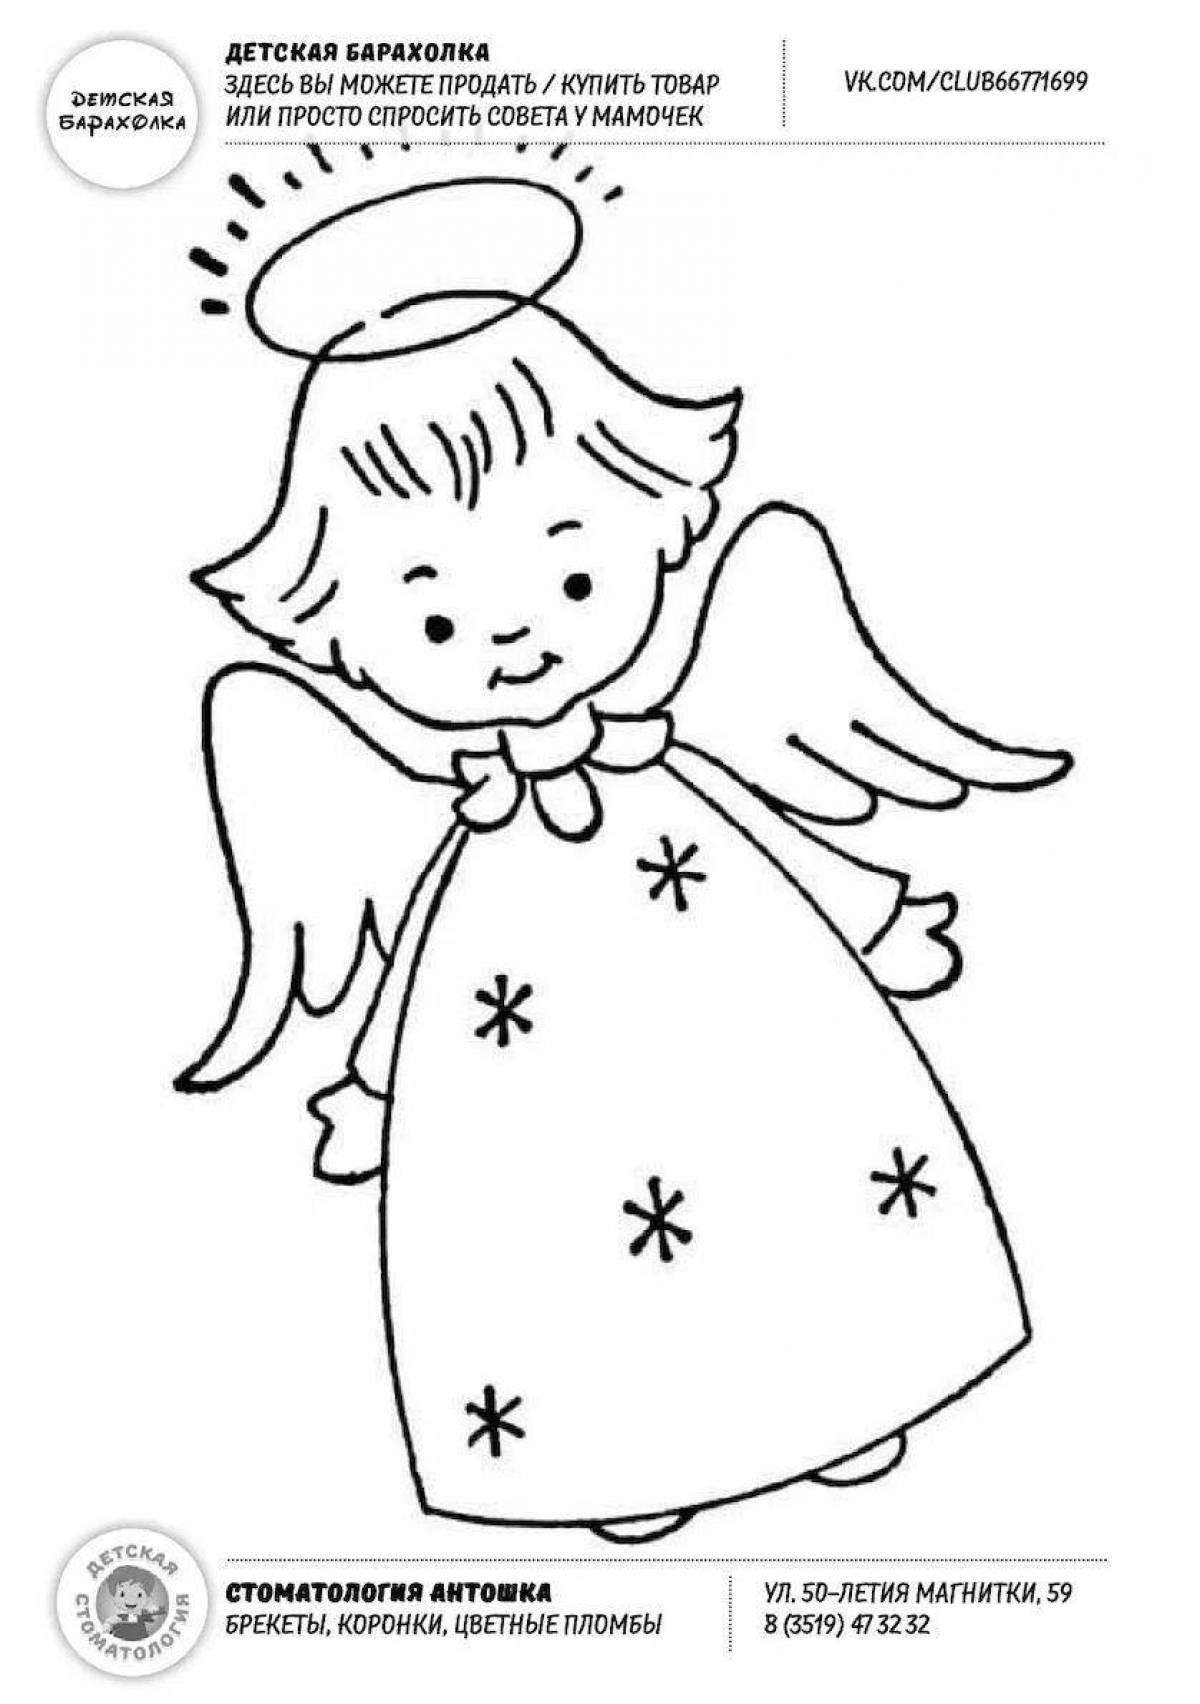 Colorful christmas angel coloring page